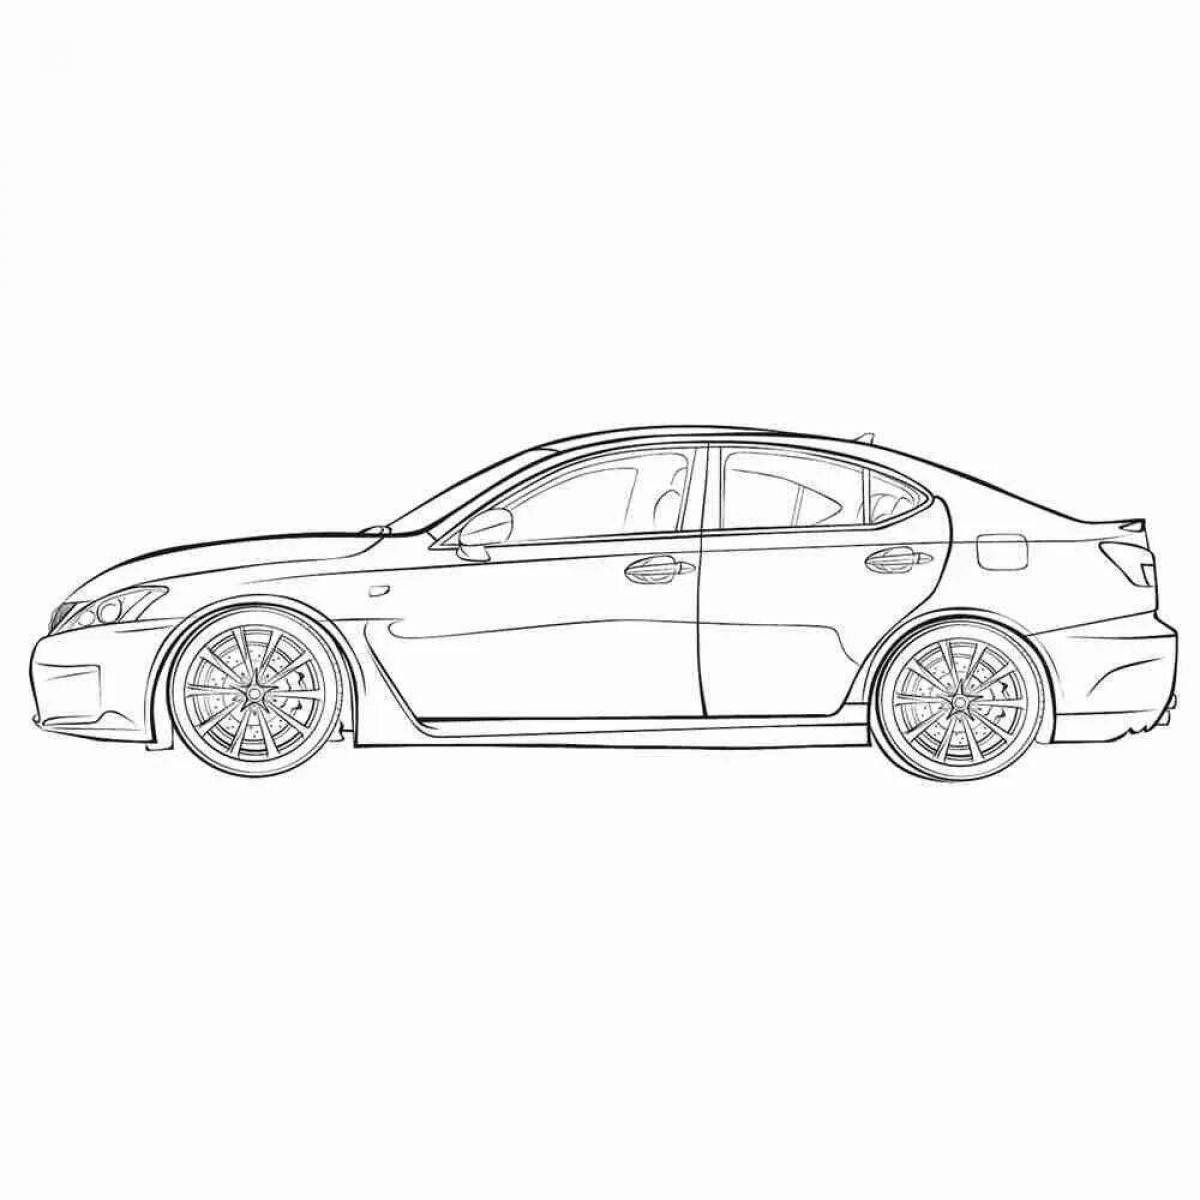 Lexus bright coloring book for kids